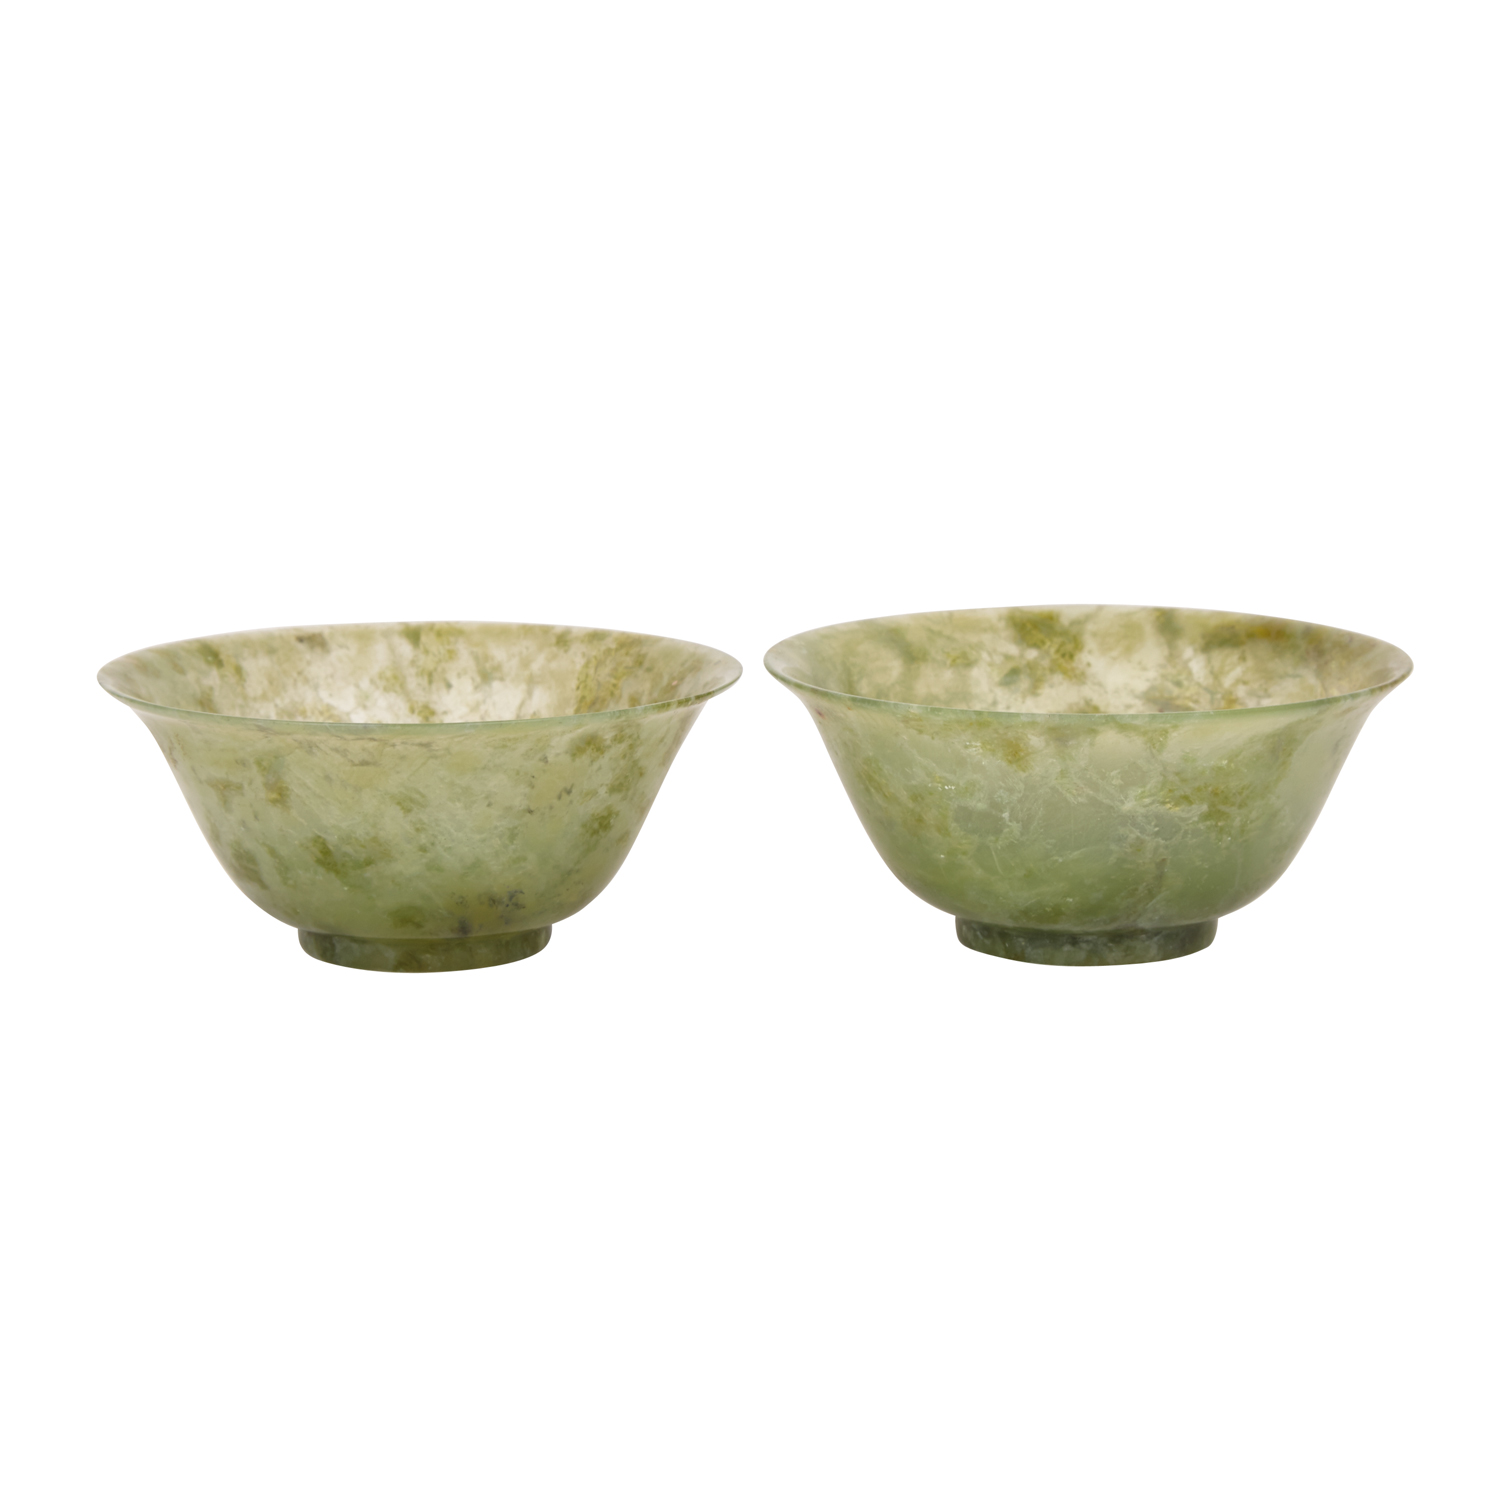 Pair of Spinach Jade Bowls, 19th/20th Century